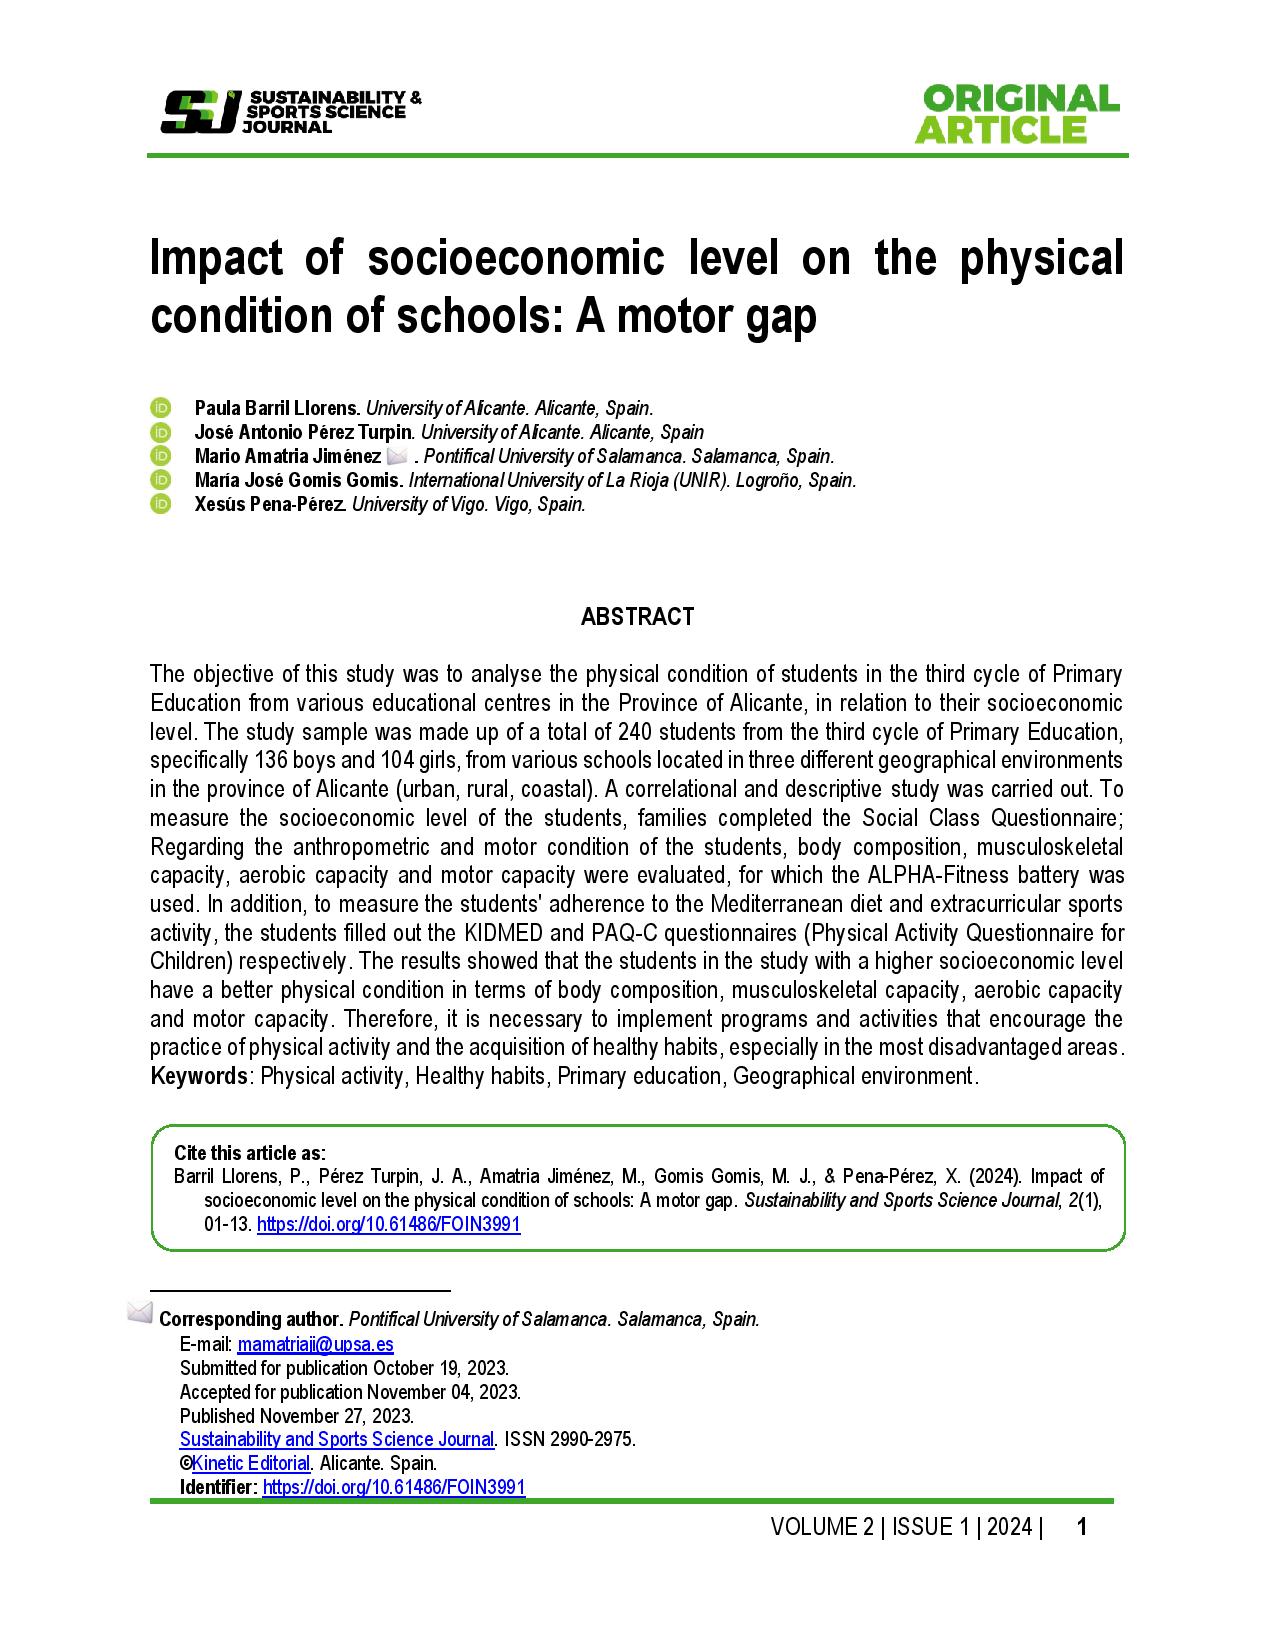 Impact of socioeconomic level on the physical condition of schools: A motor gap